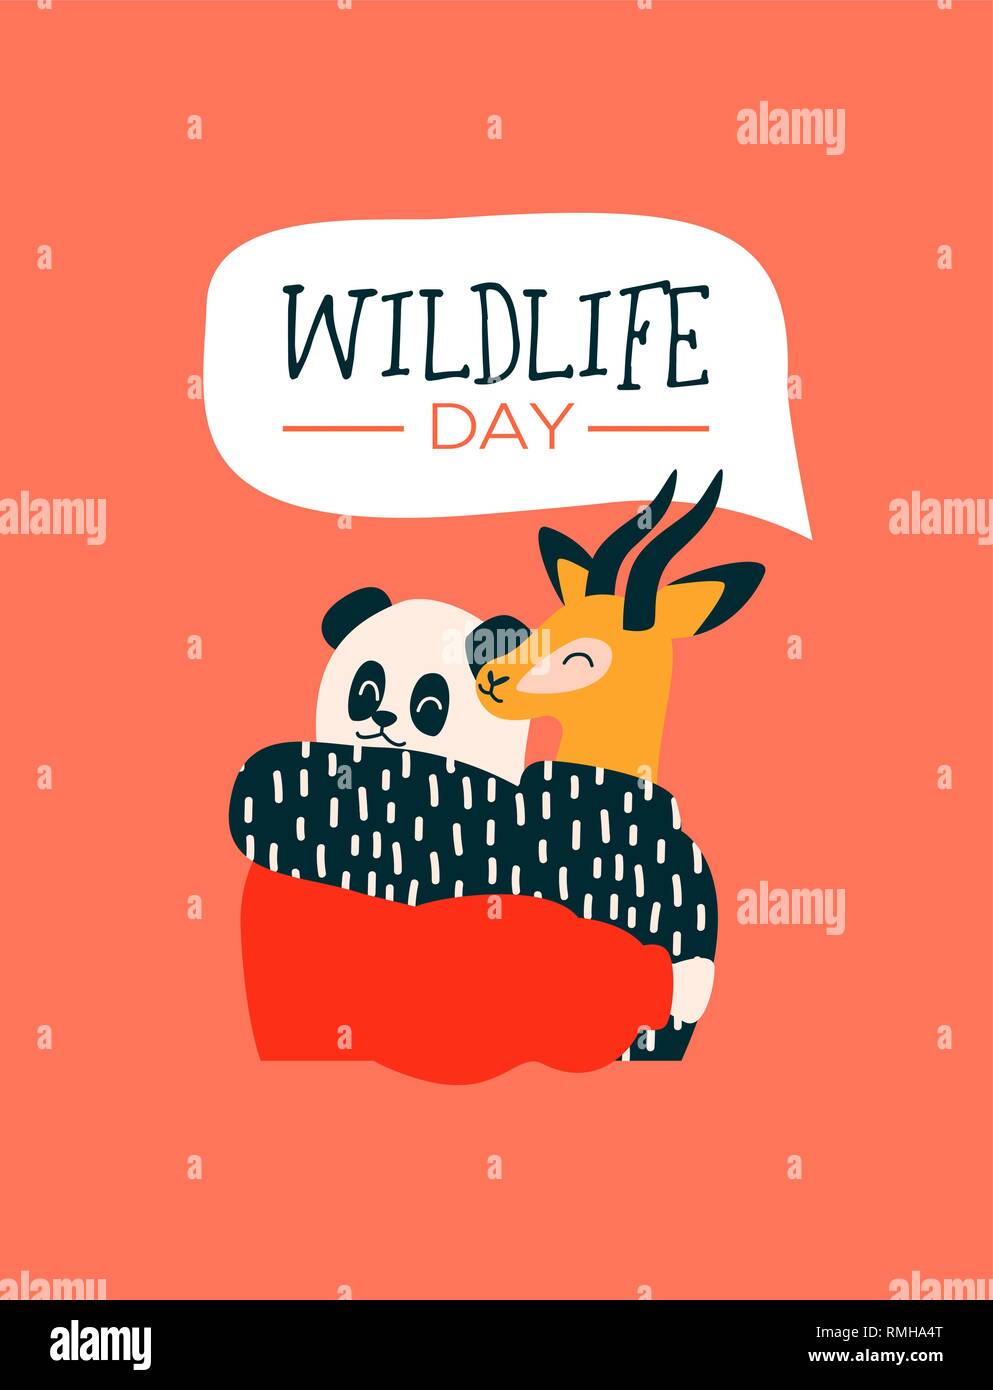 Happy wildlife day illustration. Panda bear and gazelle animal friends as people hugging together. Help, wild life conservation awareness concept. Stock Vector